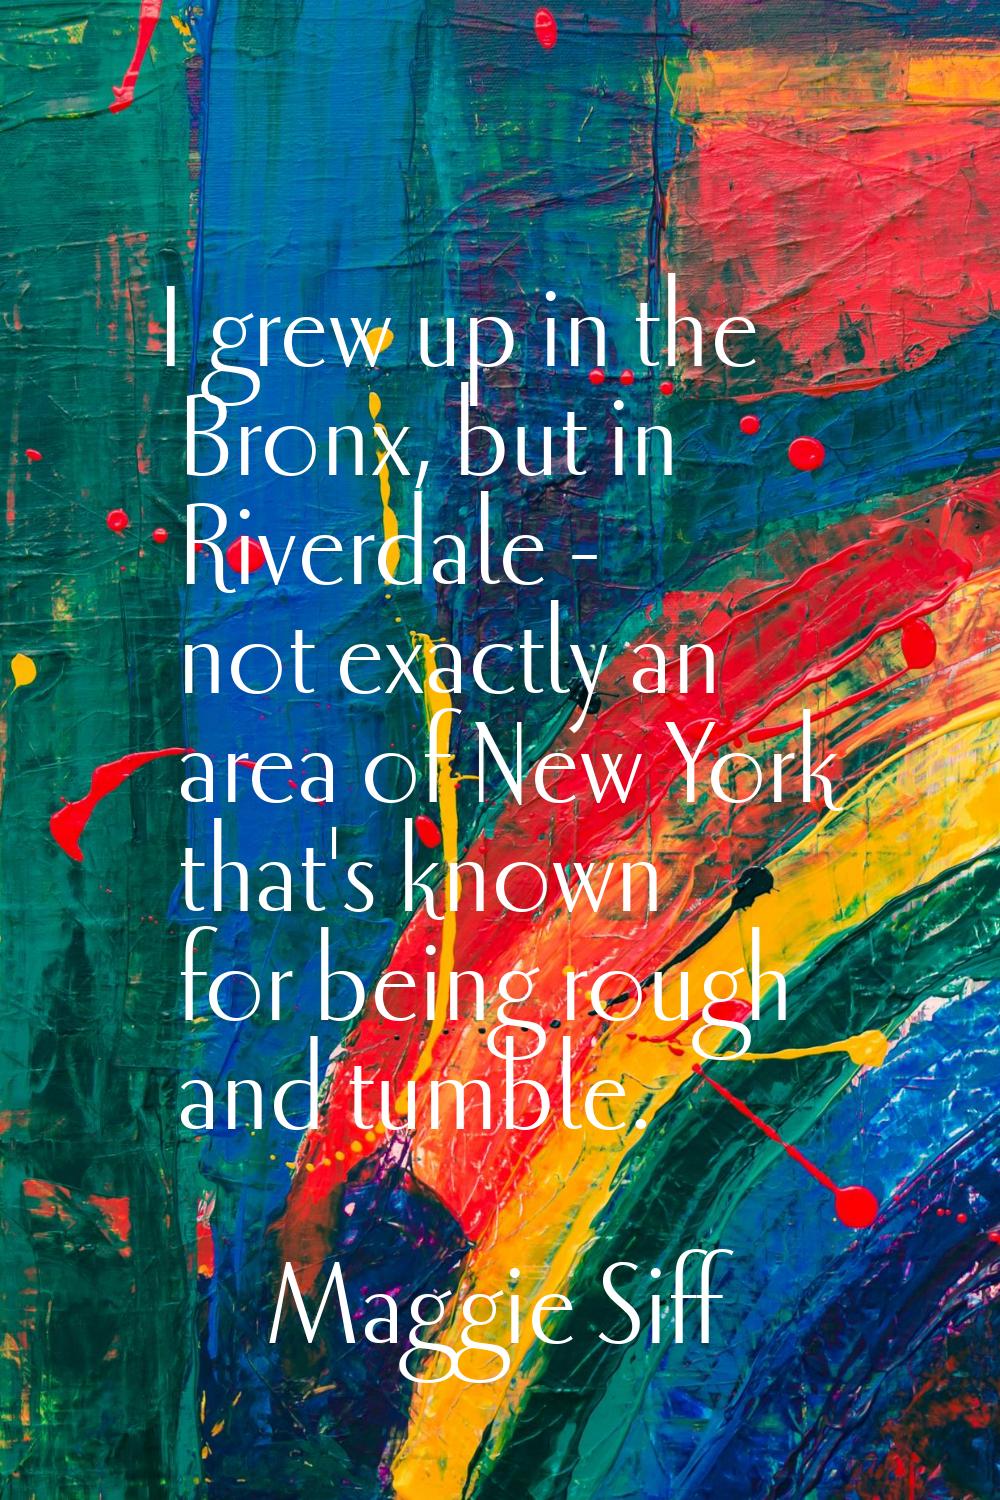 I grew up in the Bronx, but in Riverdale - not exactly an area of New York that's known for being r